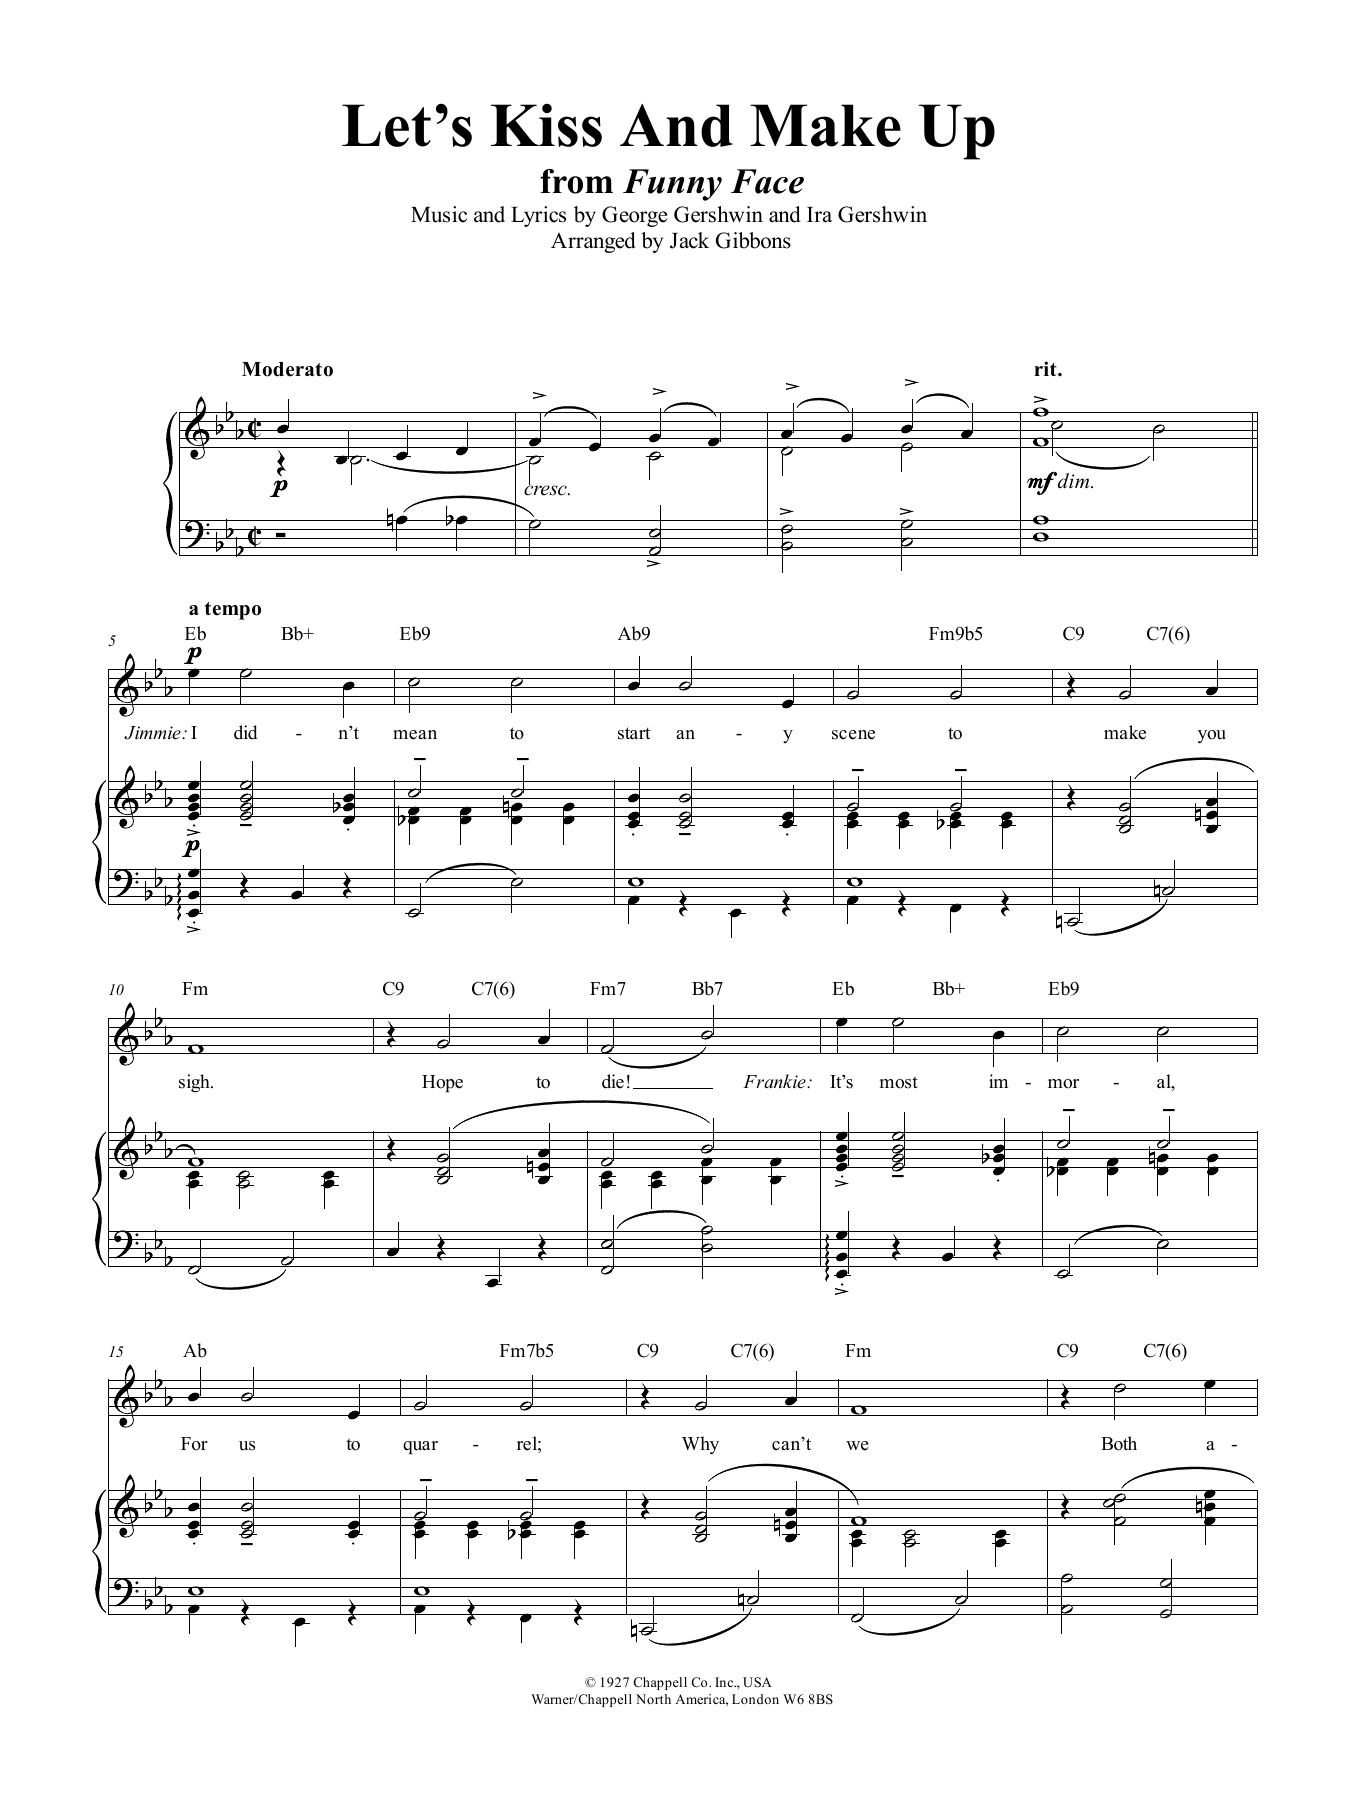 Download George Gershwin Let's Kiss And Make Up Sheet Music